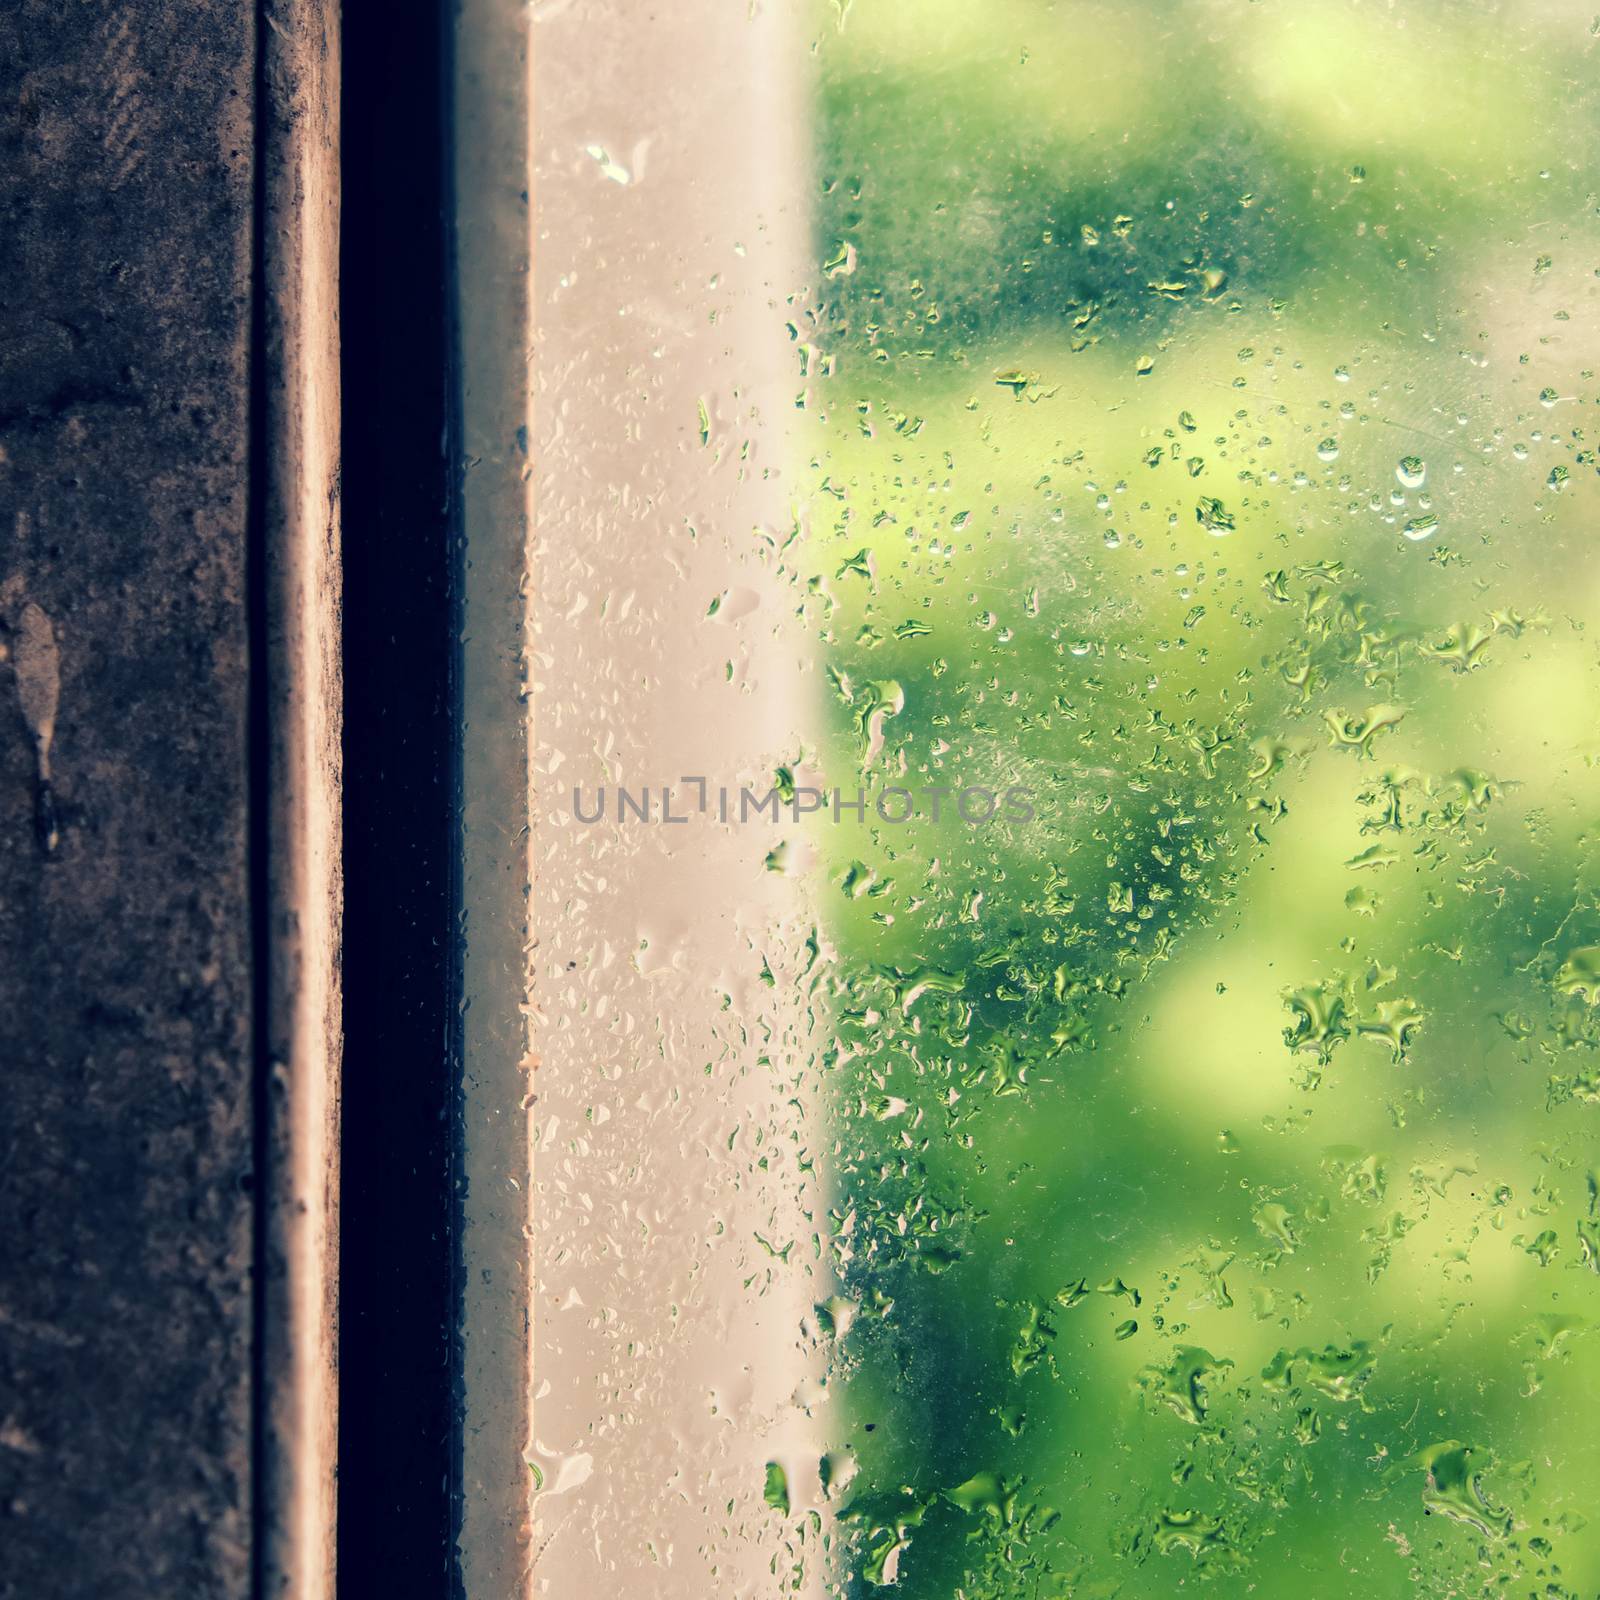 Rain drop on window in rainy day, glass with green background as seperation, nice background for love